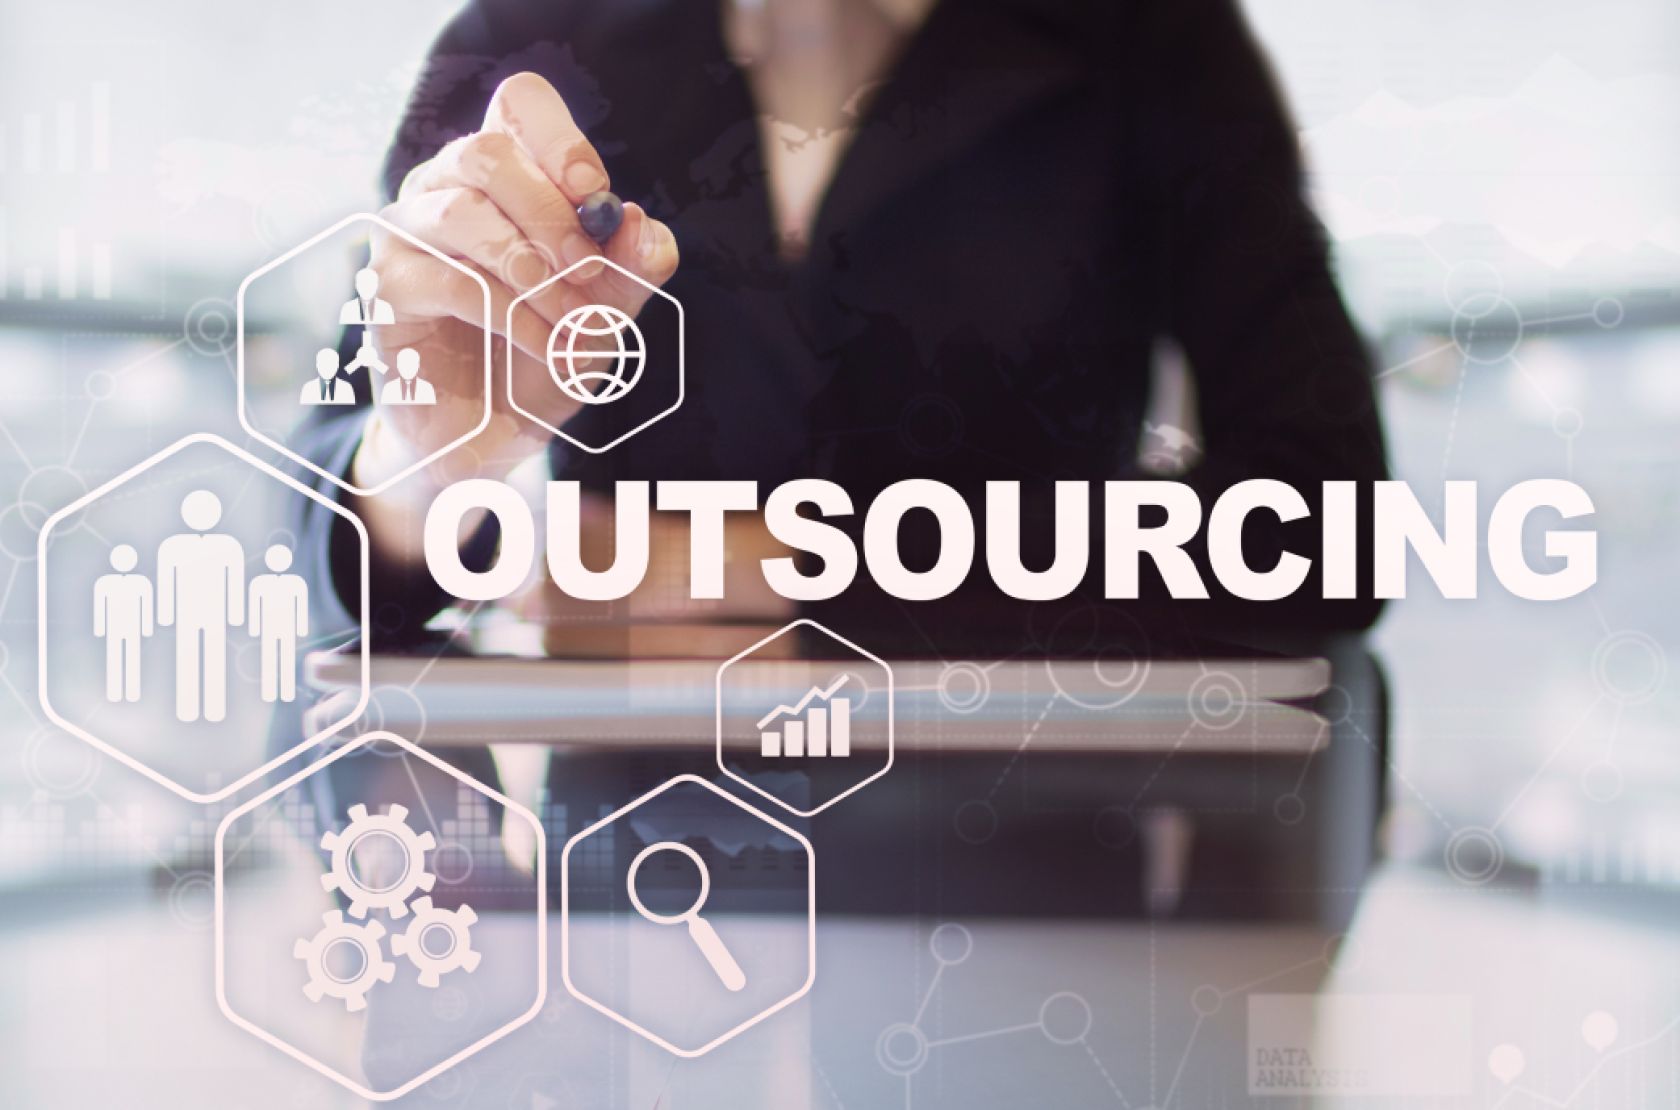 What is offshore outsourcing?